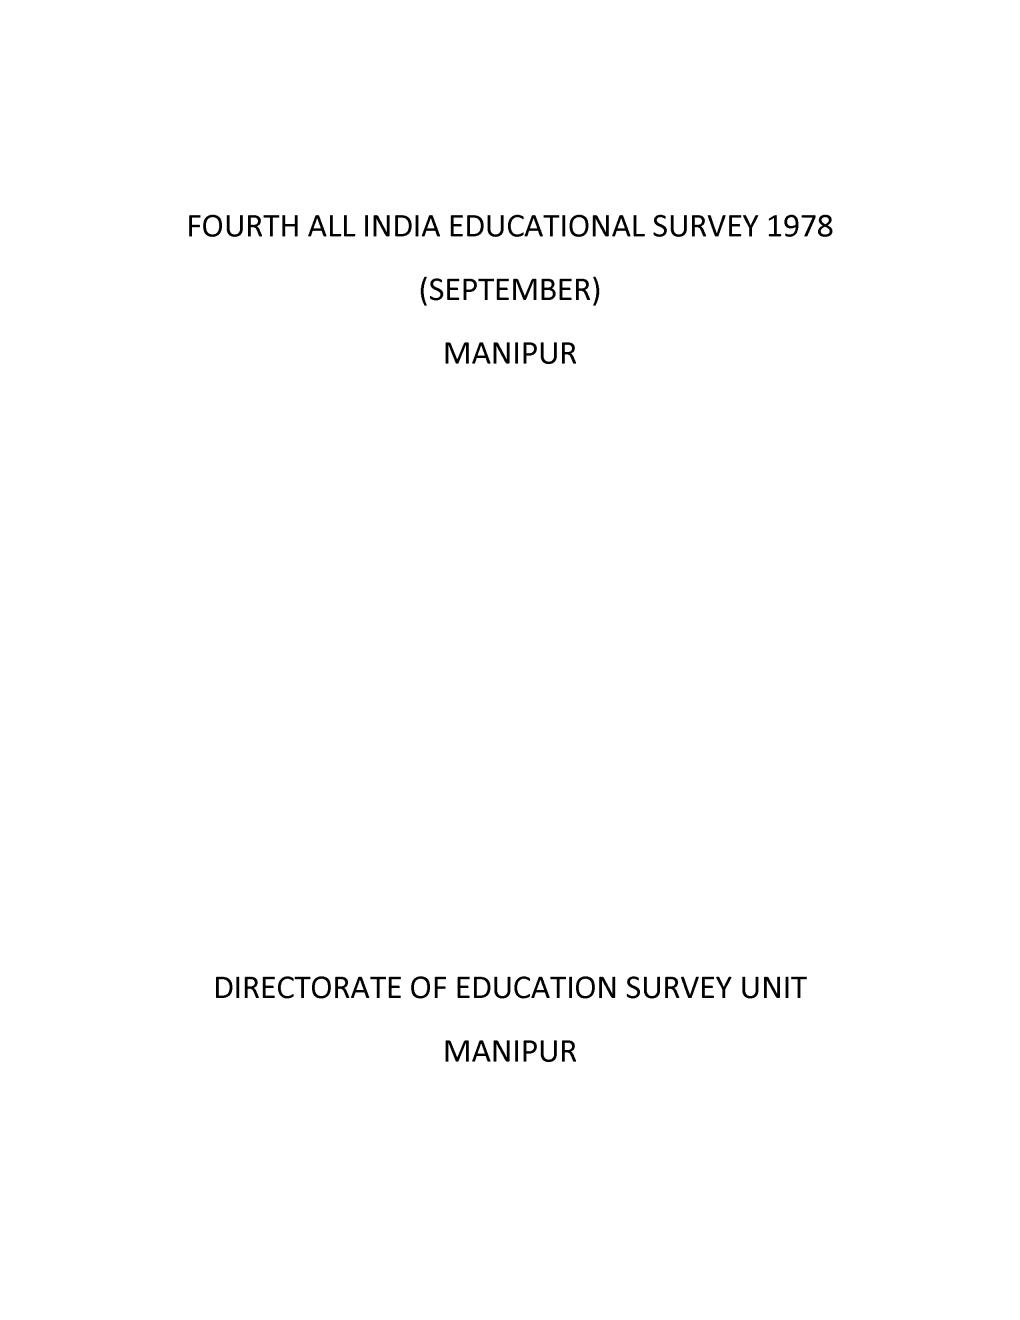 Fourth All India Educational Survey 1978 (September) Manipur